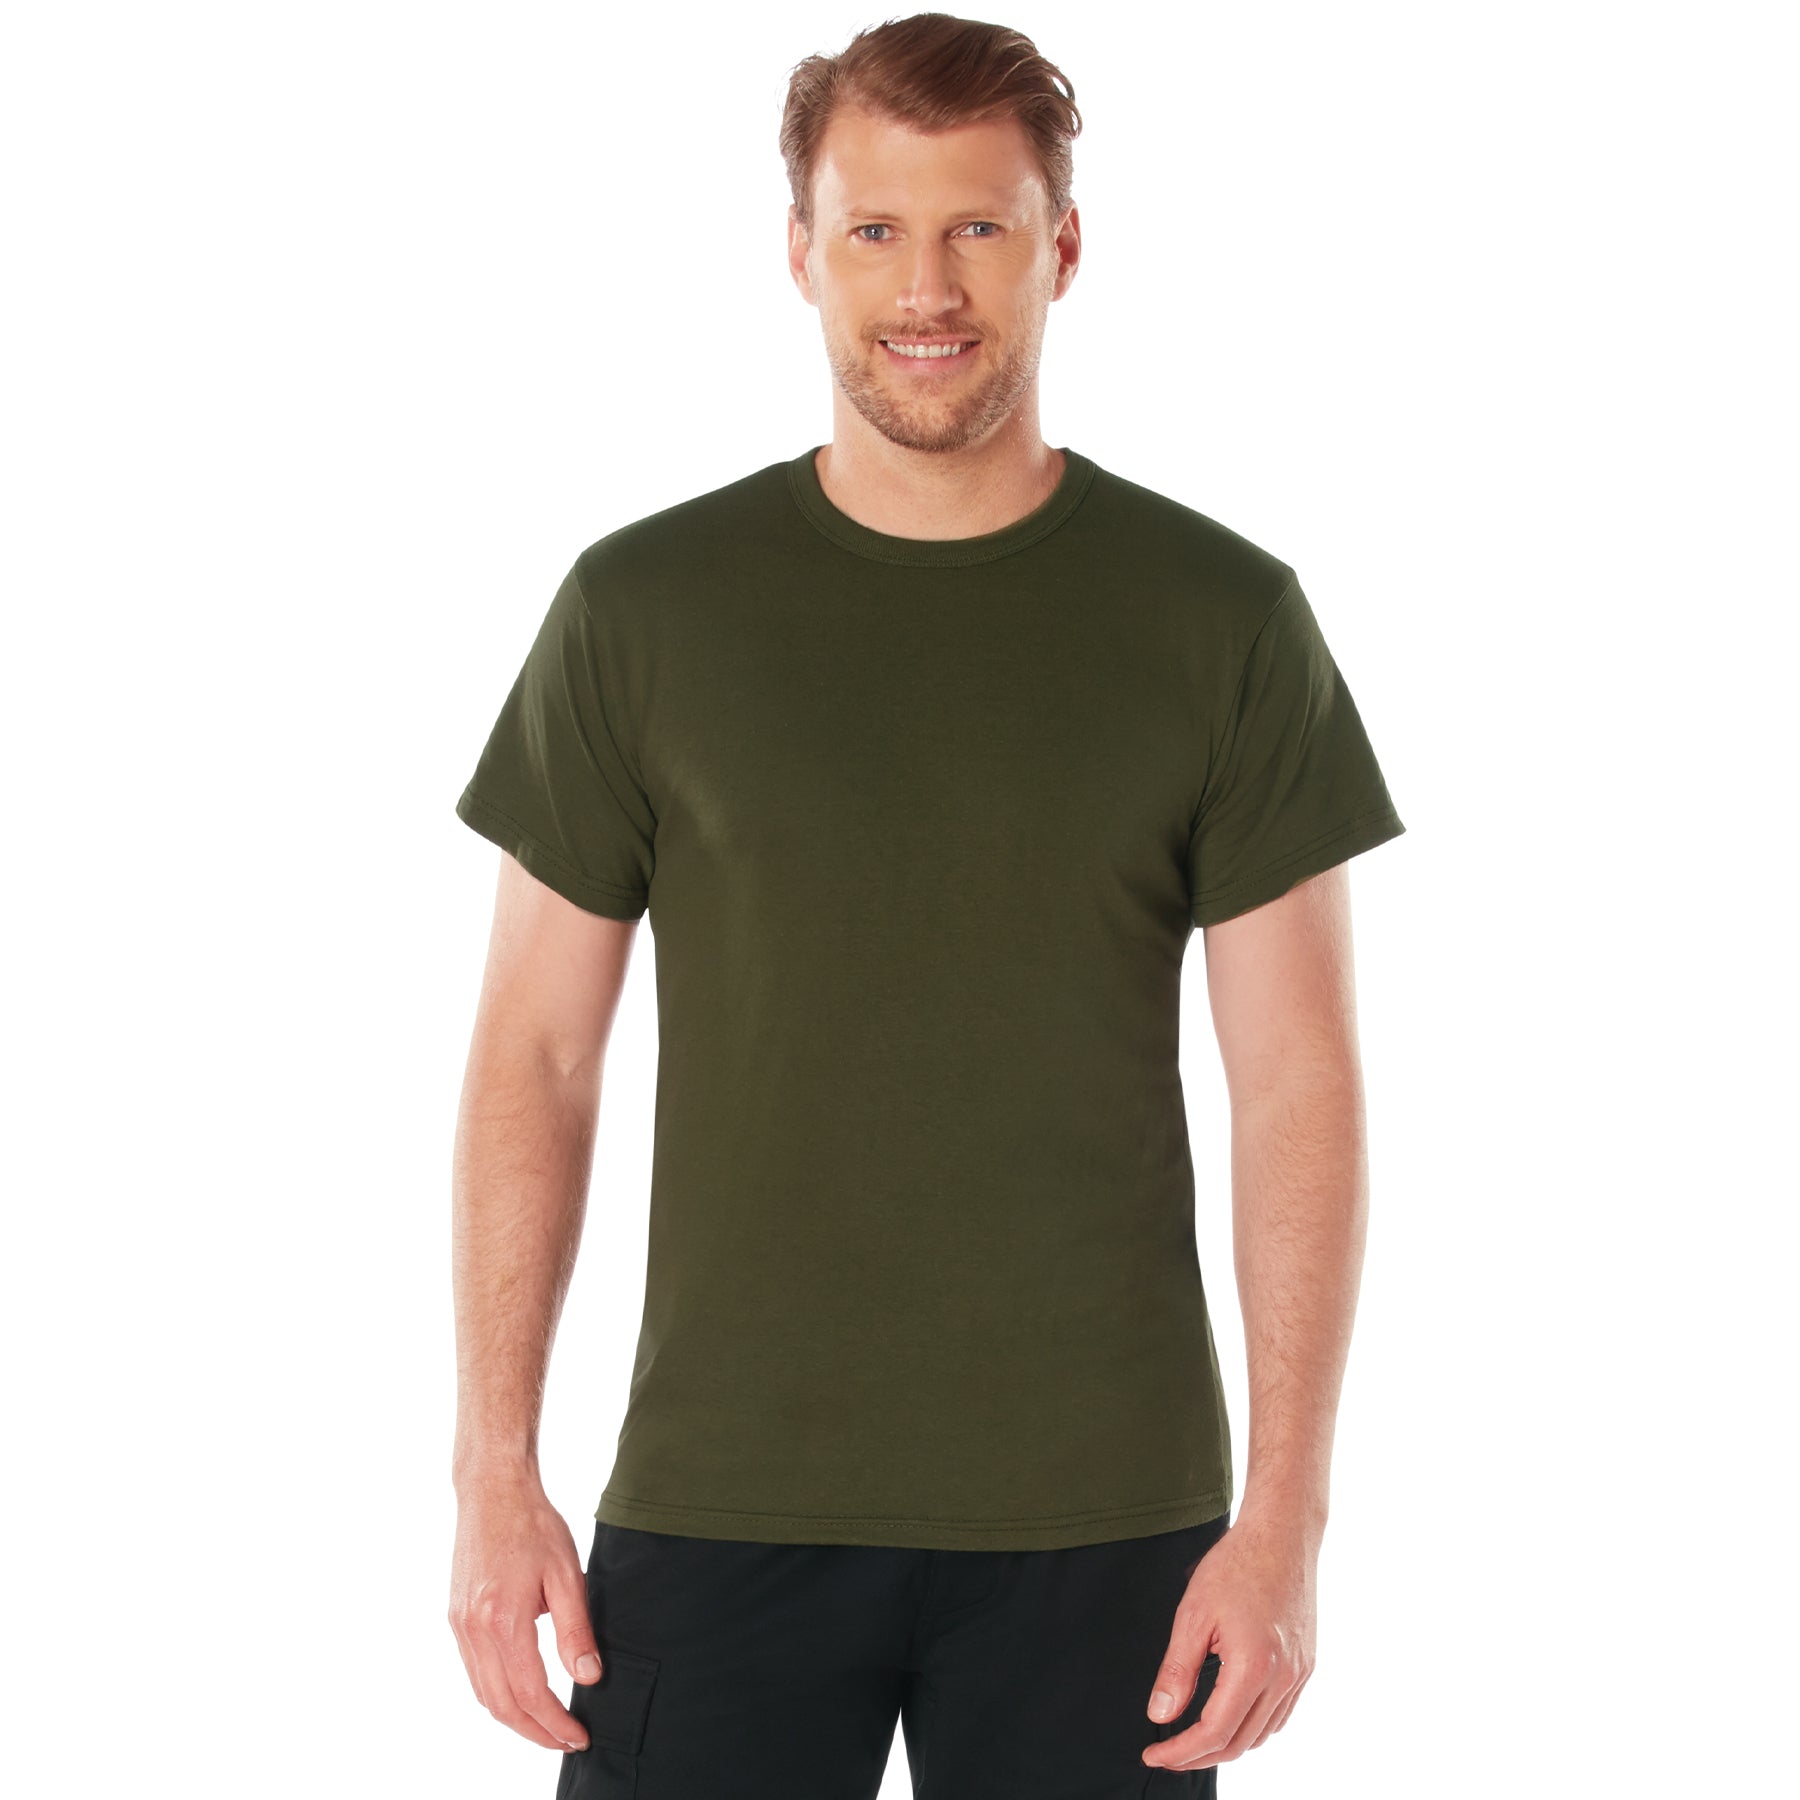 [AR 670-1][Military] Poly/Cotton T-Shirts Olive Drab